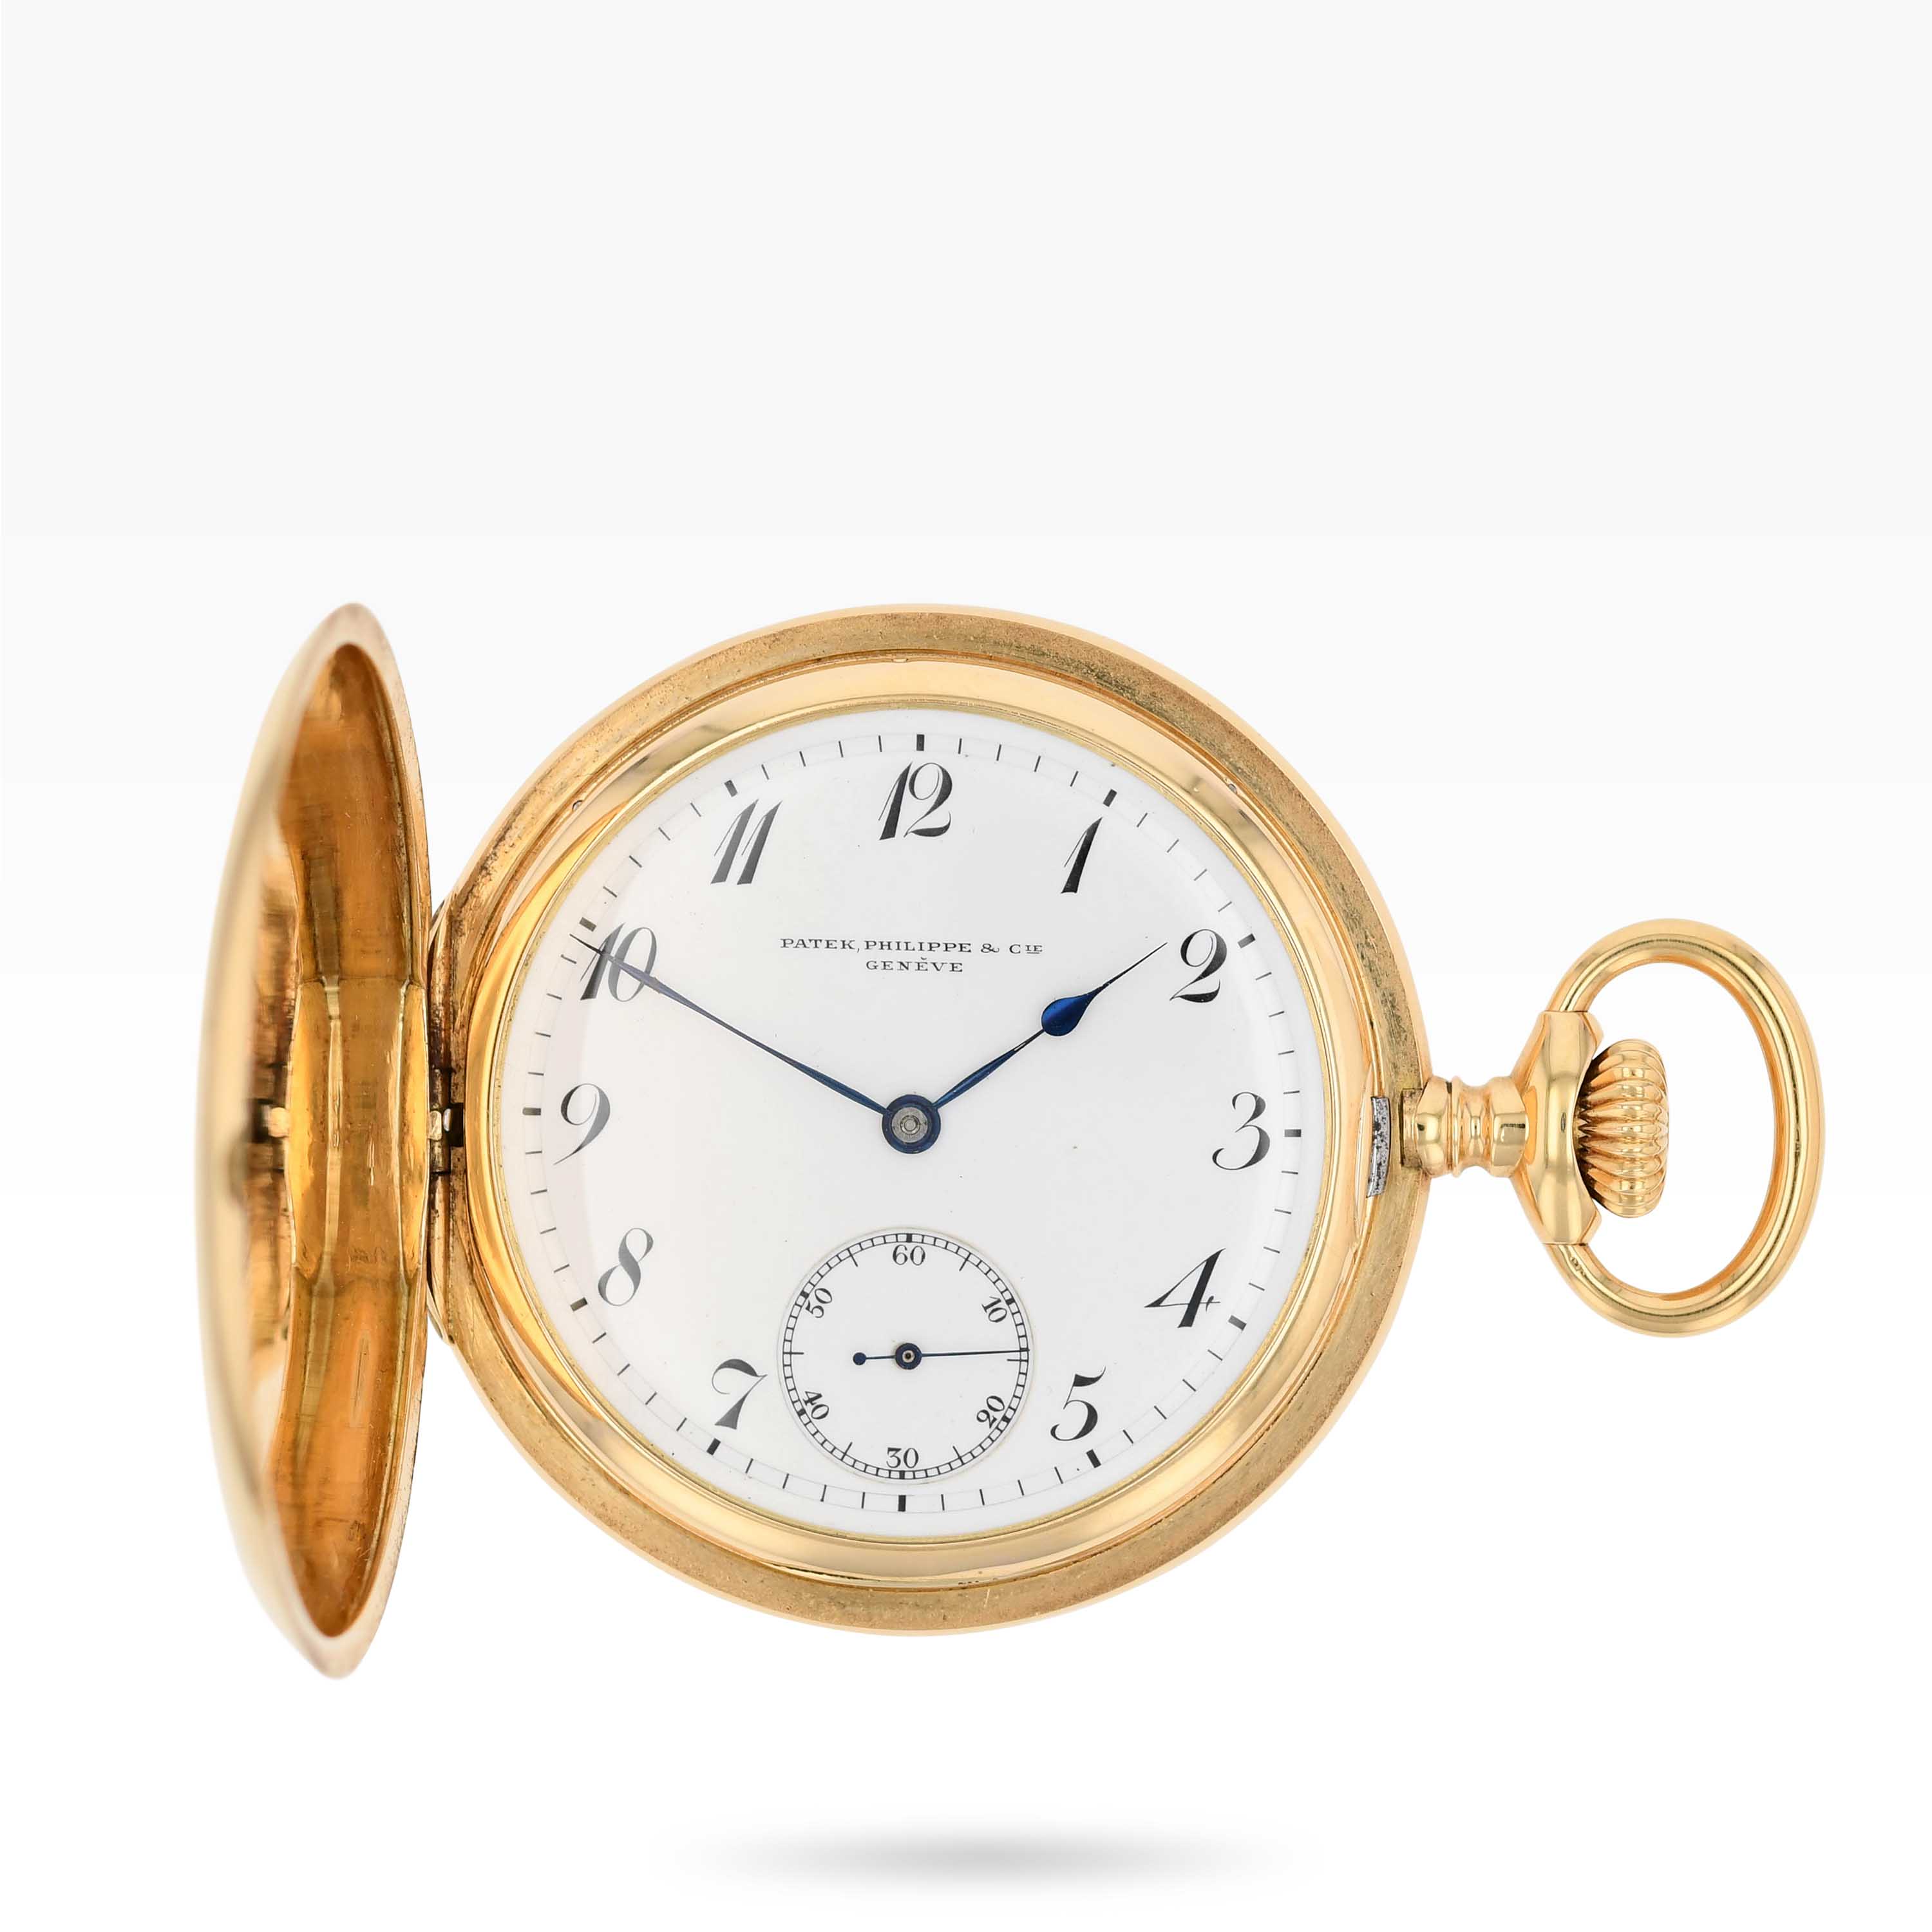 1302PW1 Patek Philippe Hunter Case with suspended Breguet numerals Pocket Watch img-main1